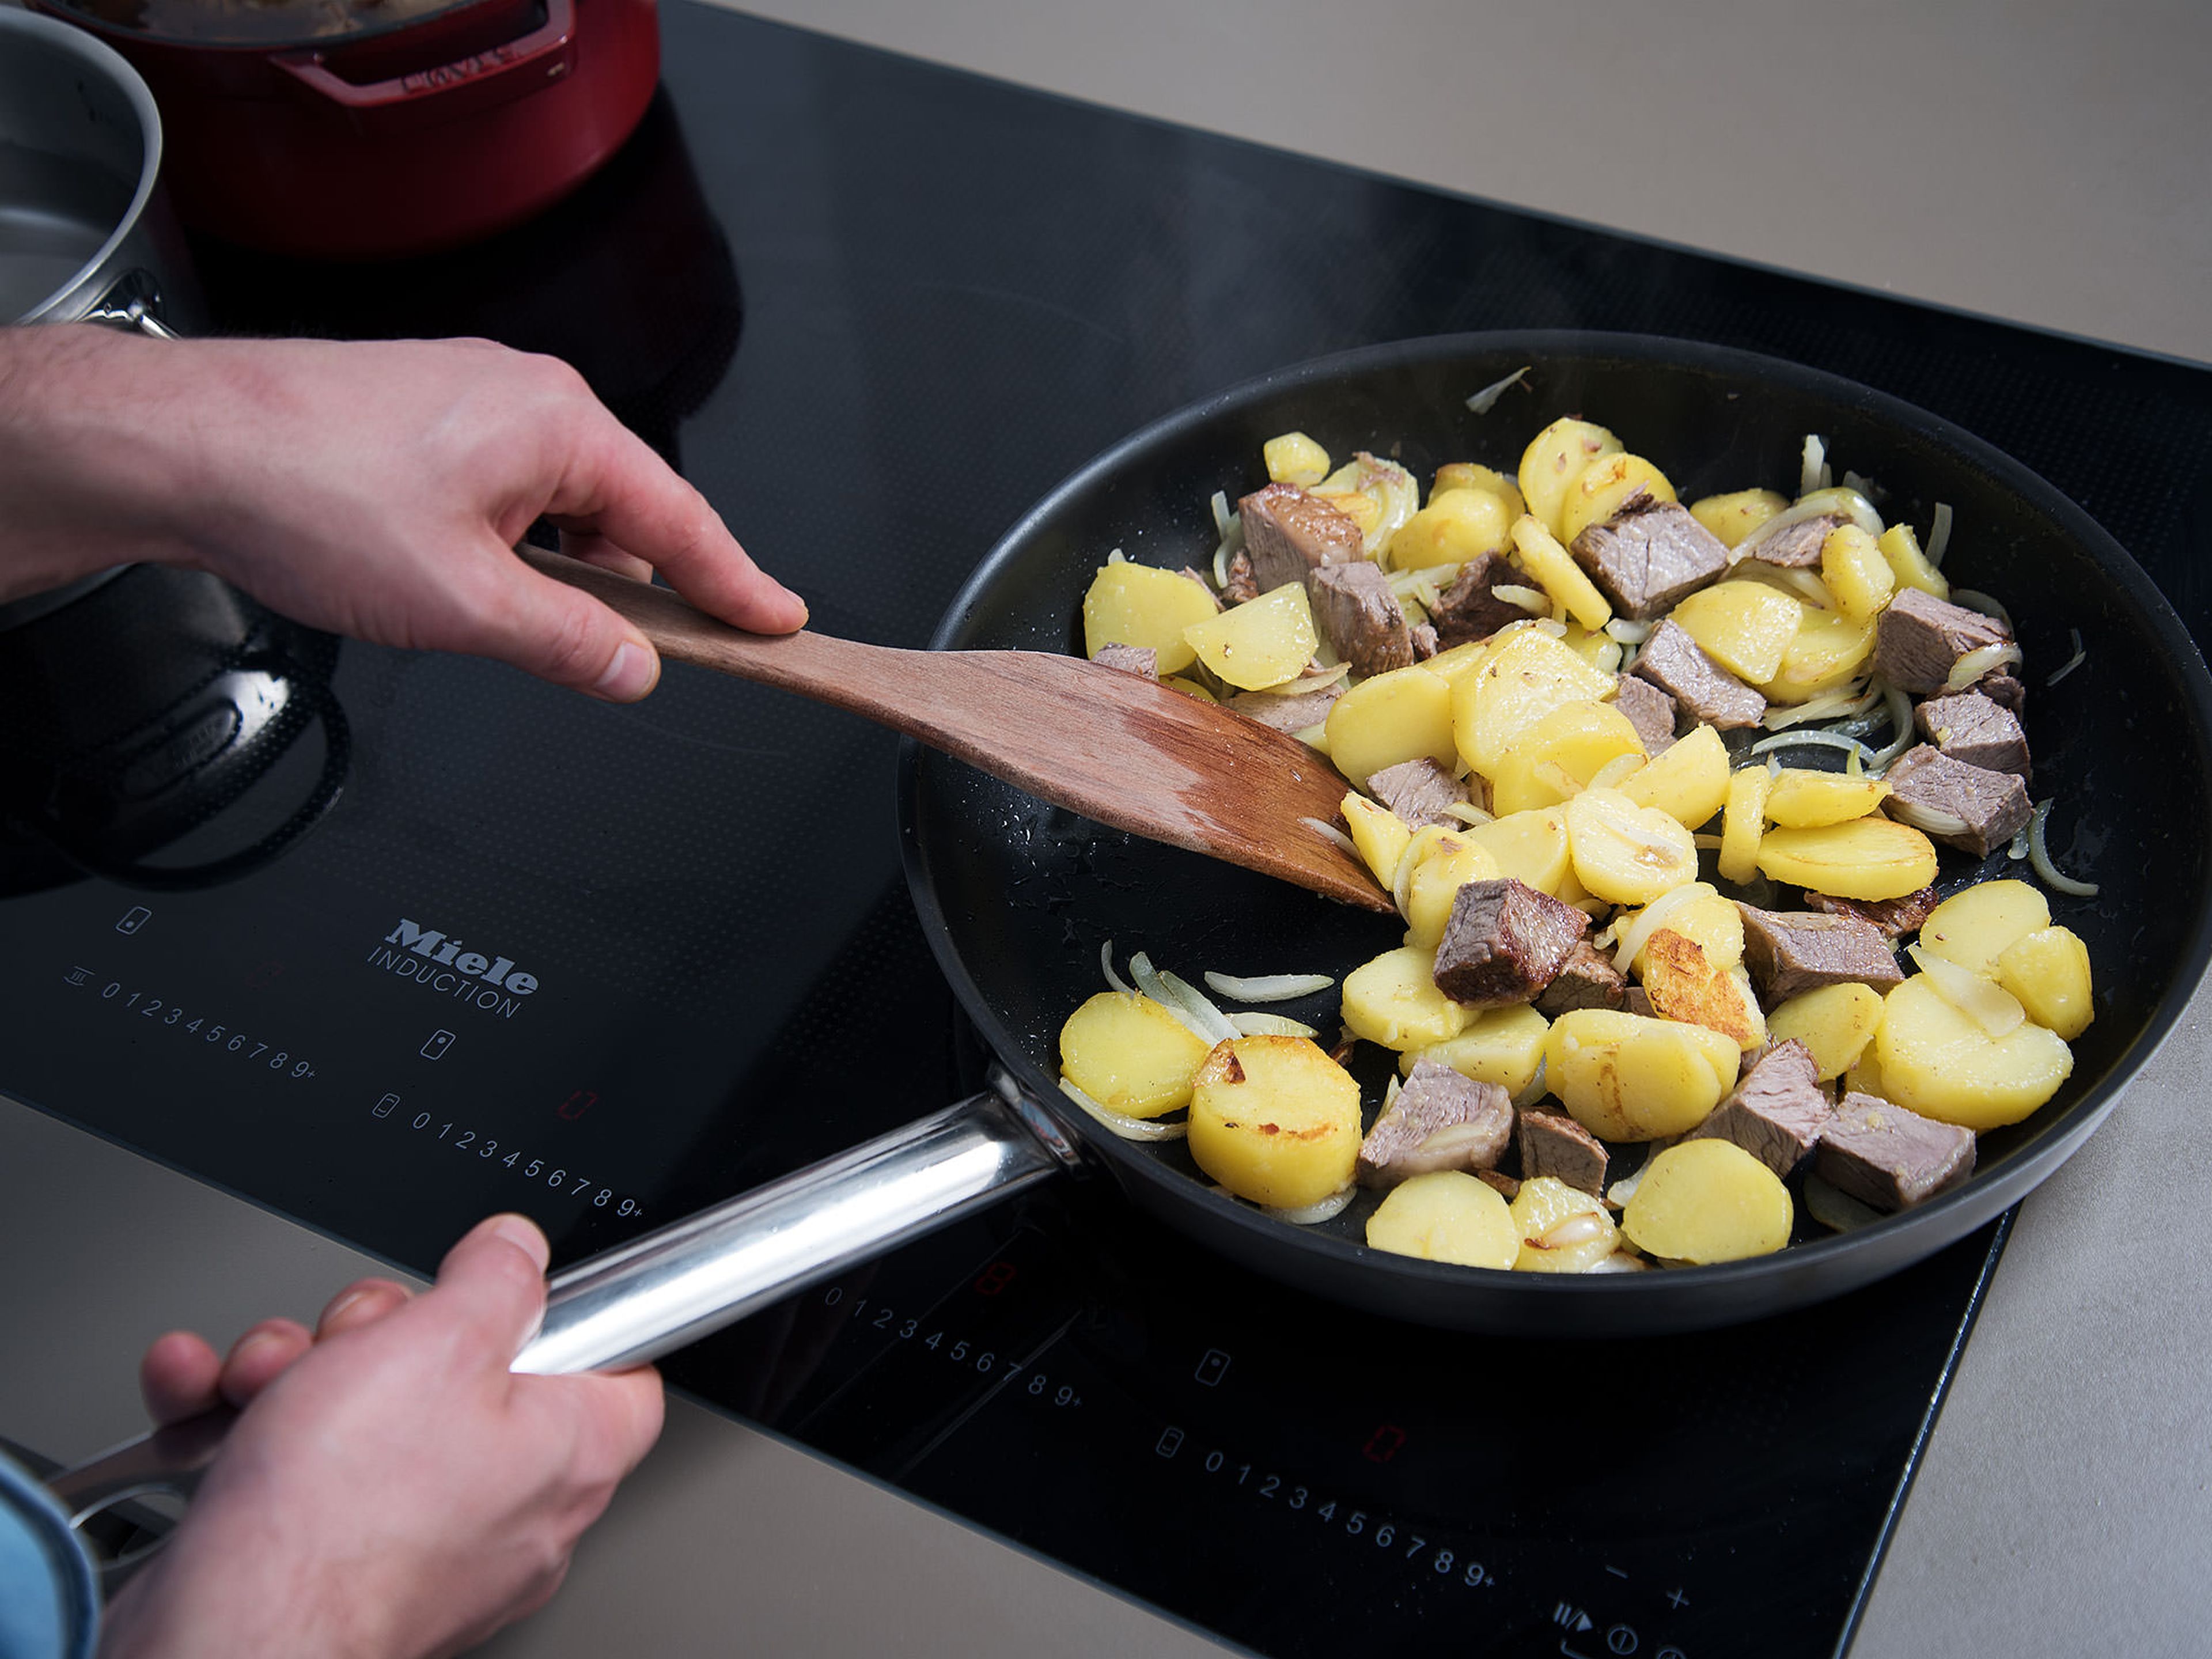 Melt some of the clarified butter in a pan over medium-high heat, add onion and boiled potatoes and sauté for approx. 3 min. Add beef pieces and marjoram and fry for another 5 min., until crispy and brown. Season with salt and pepper to taste and transfer to serving plates.